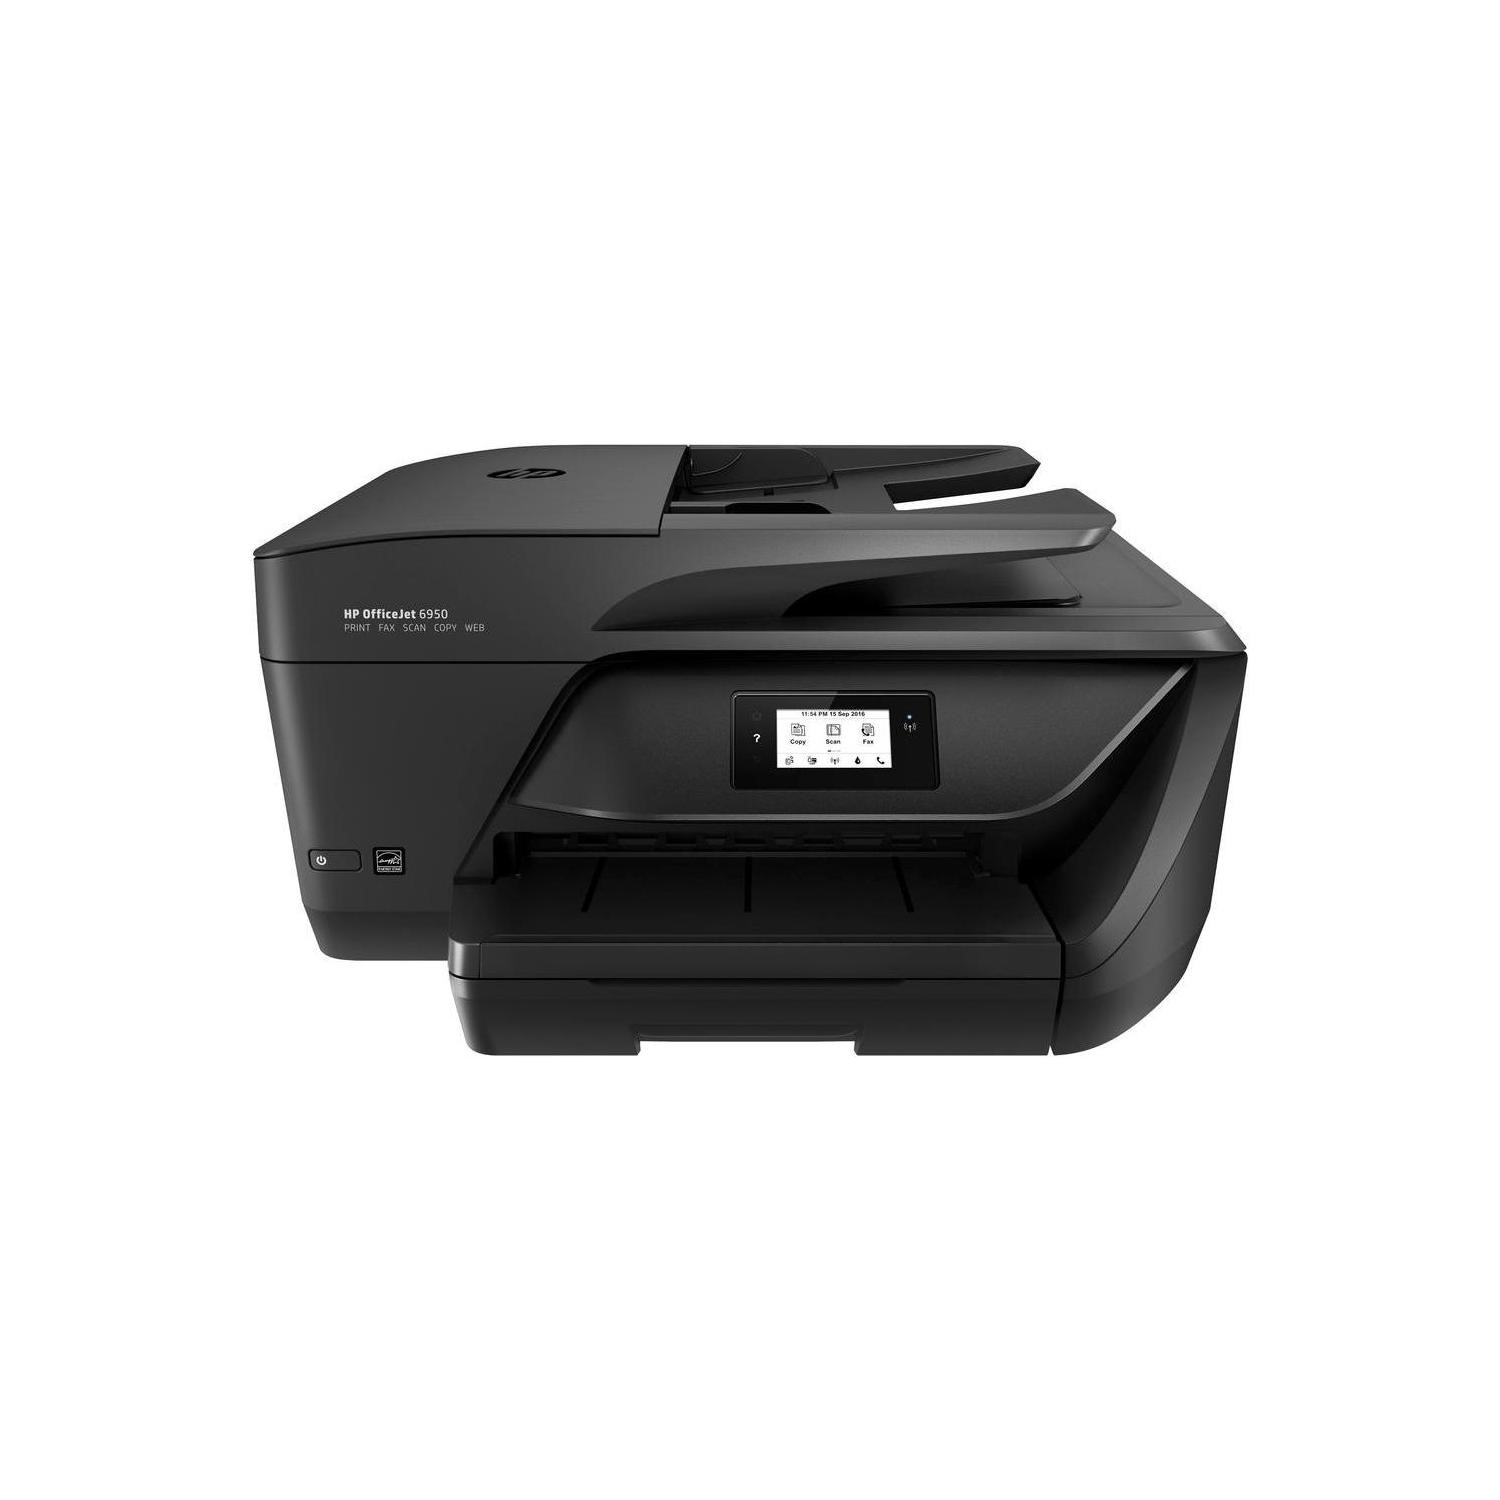 What should I do to Connect HP Officejet 6950 Printer to Wifi?